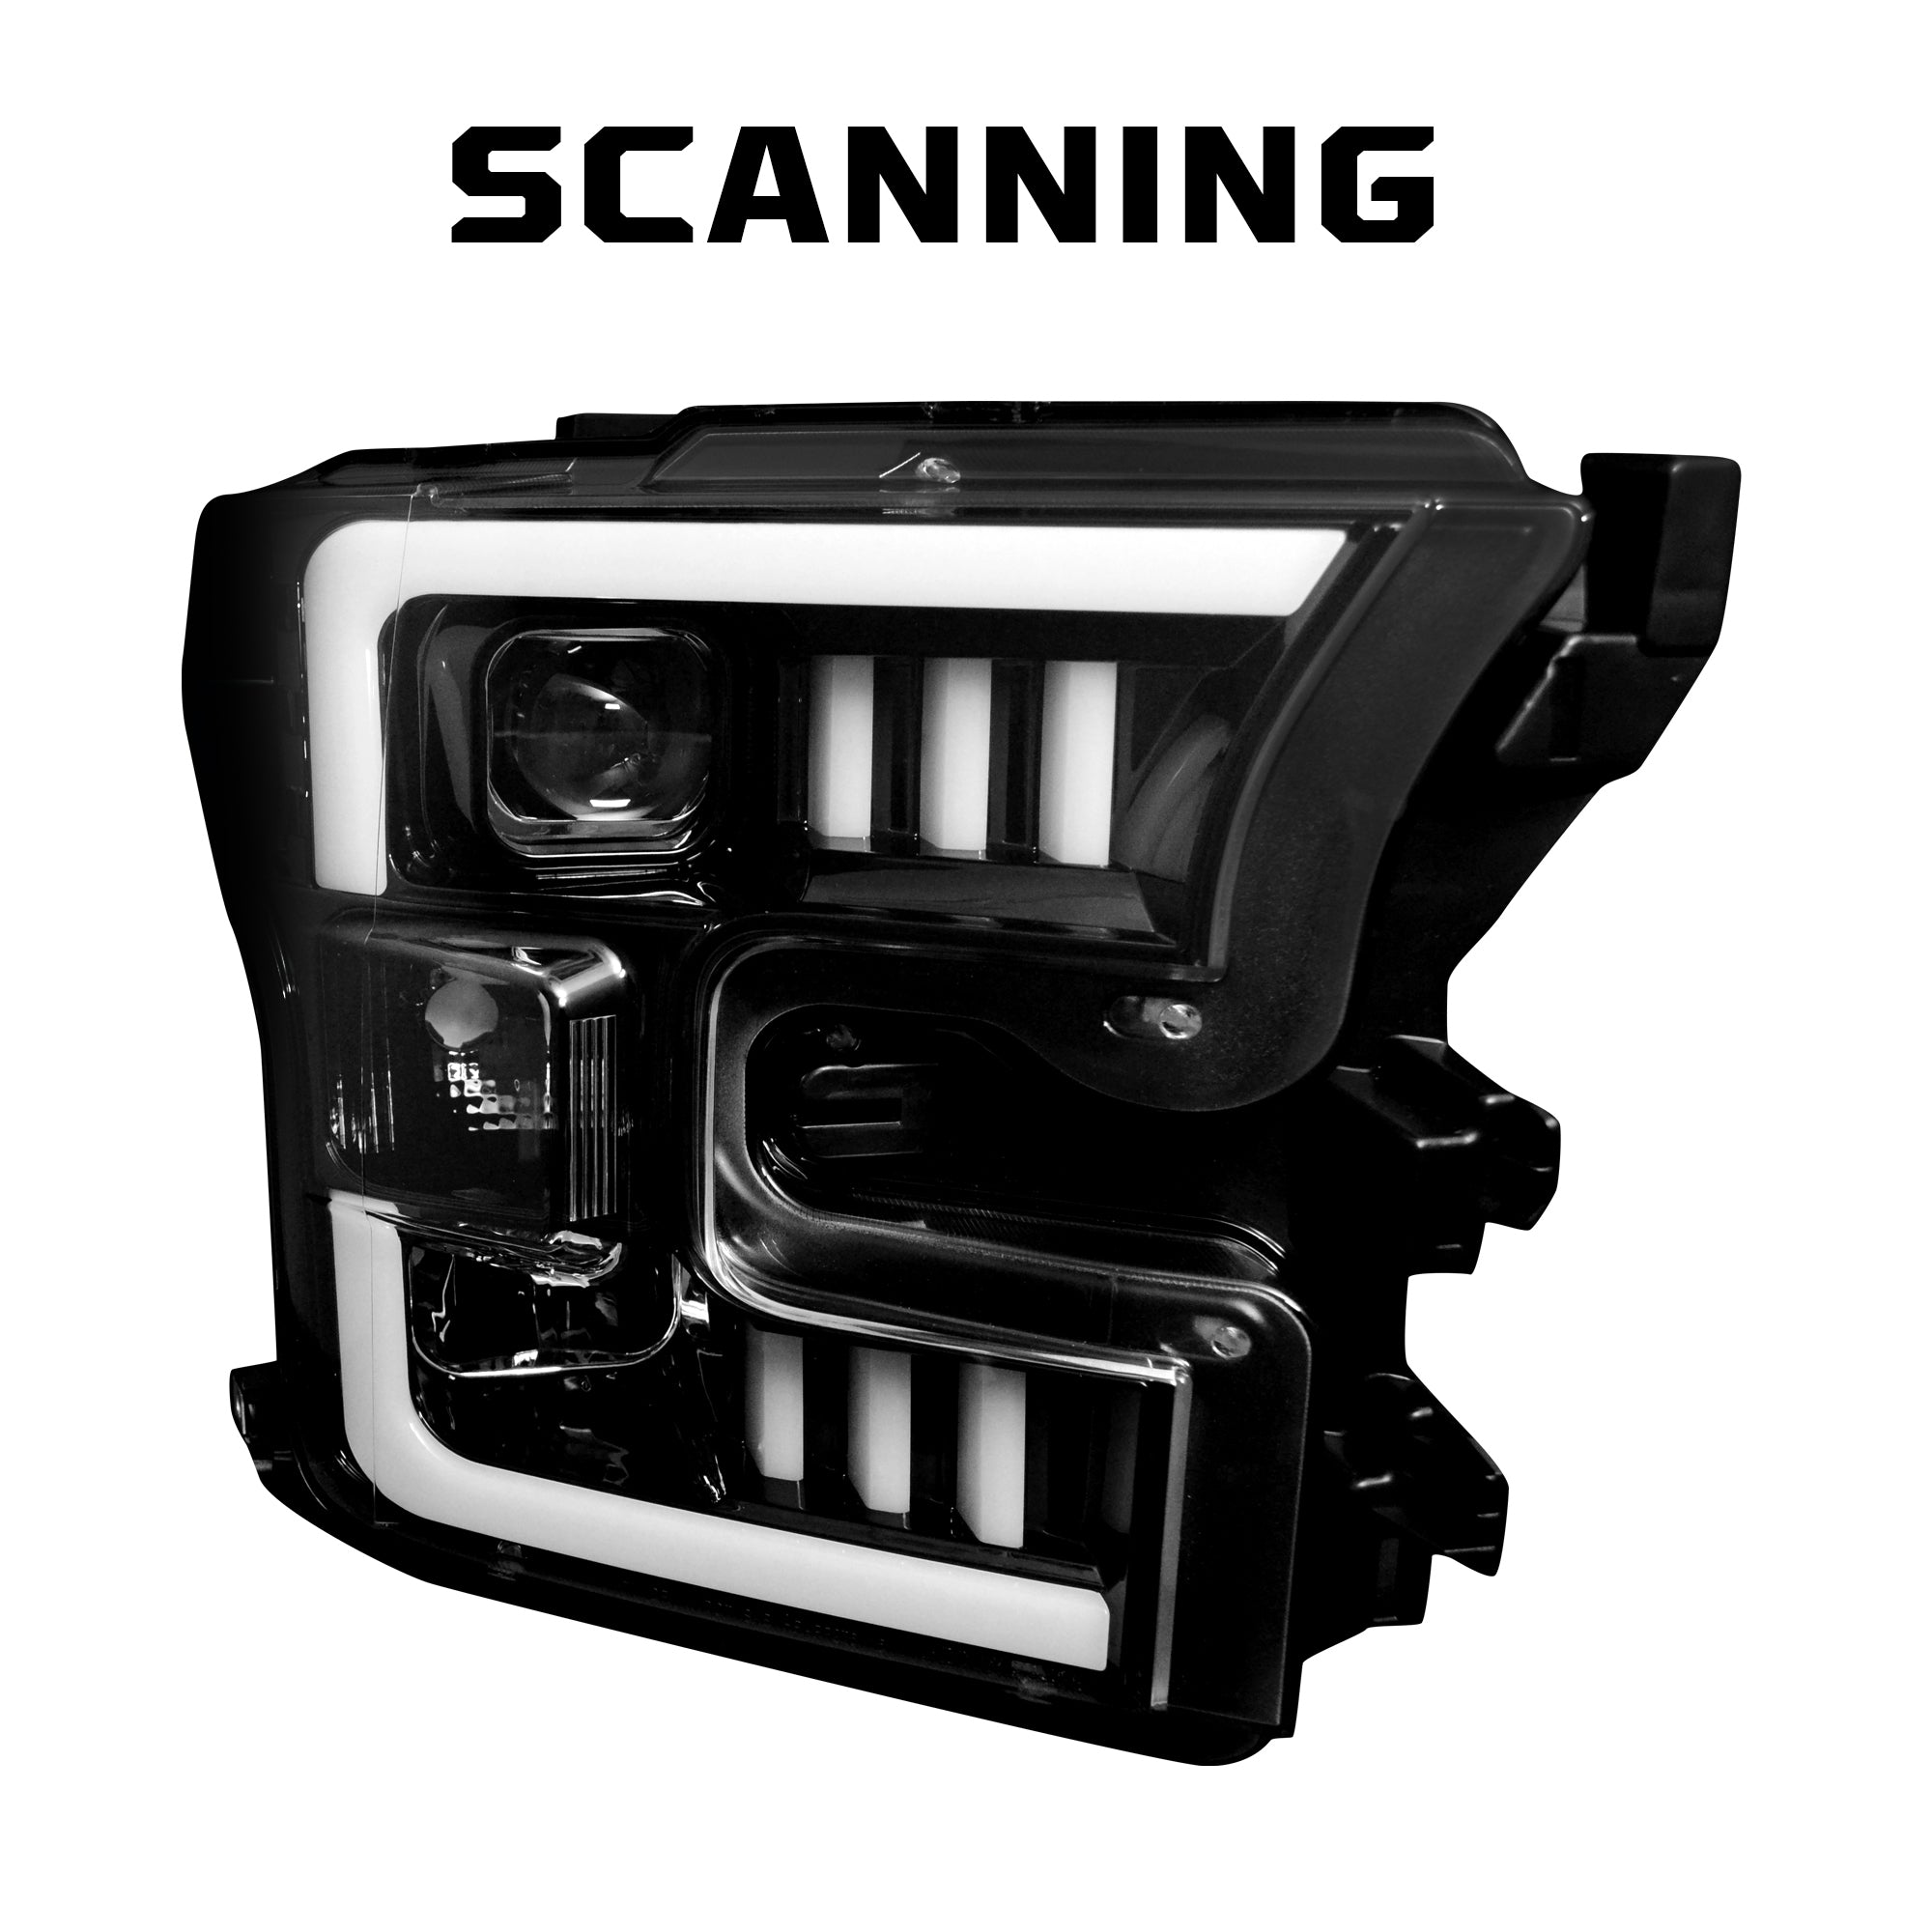 Ford F150 15-17 Projector Headlights OLED DRL LED Scanning